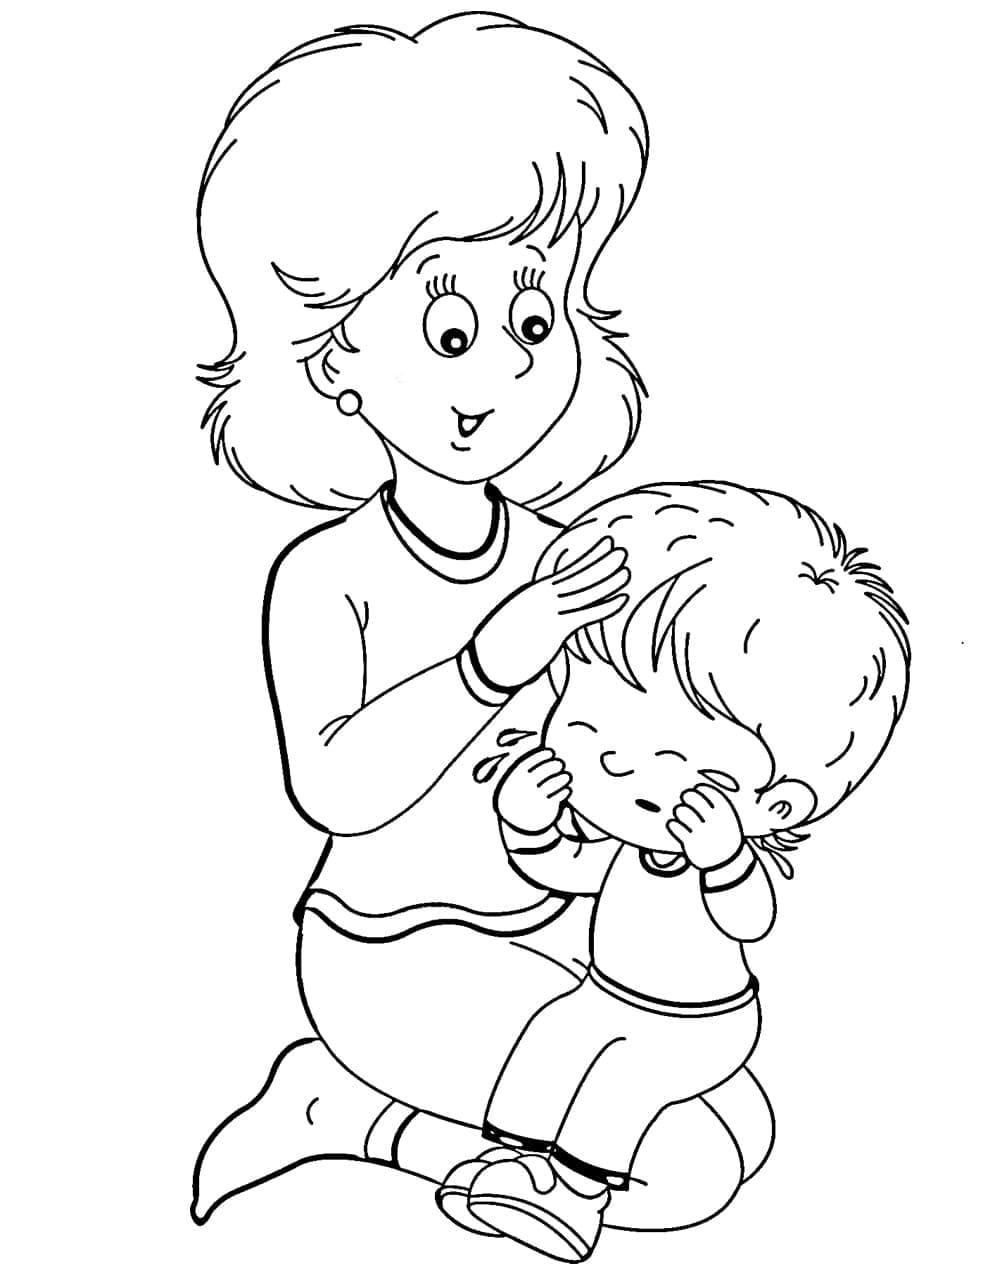 Maman Douce coloring page